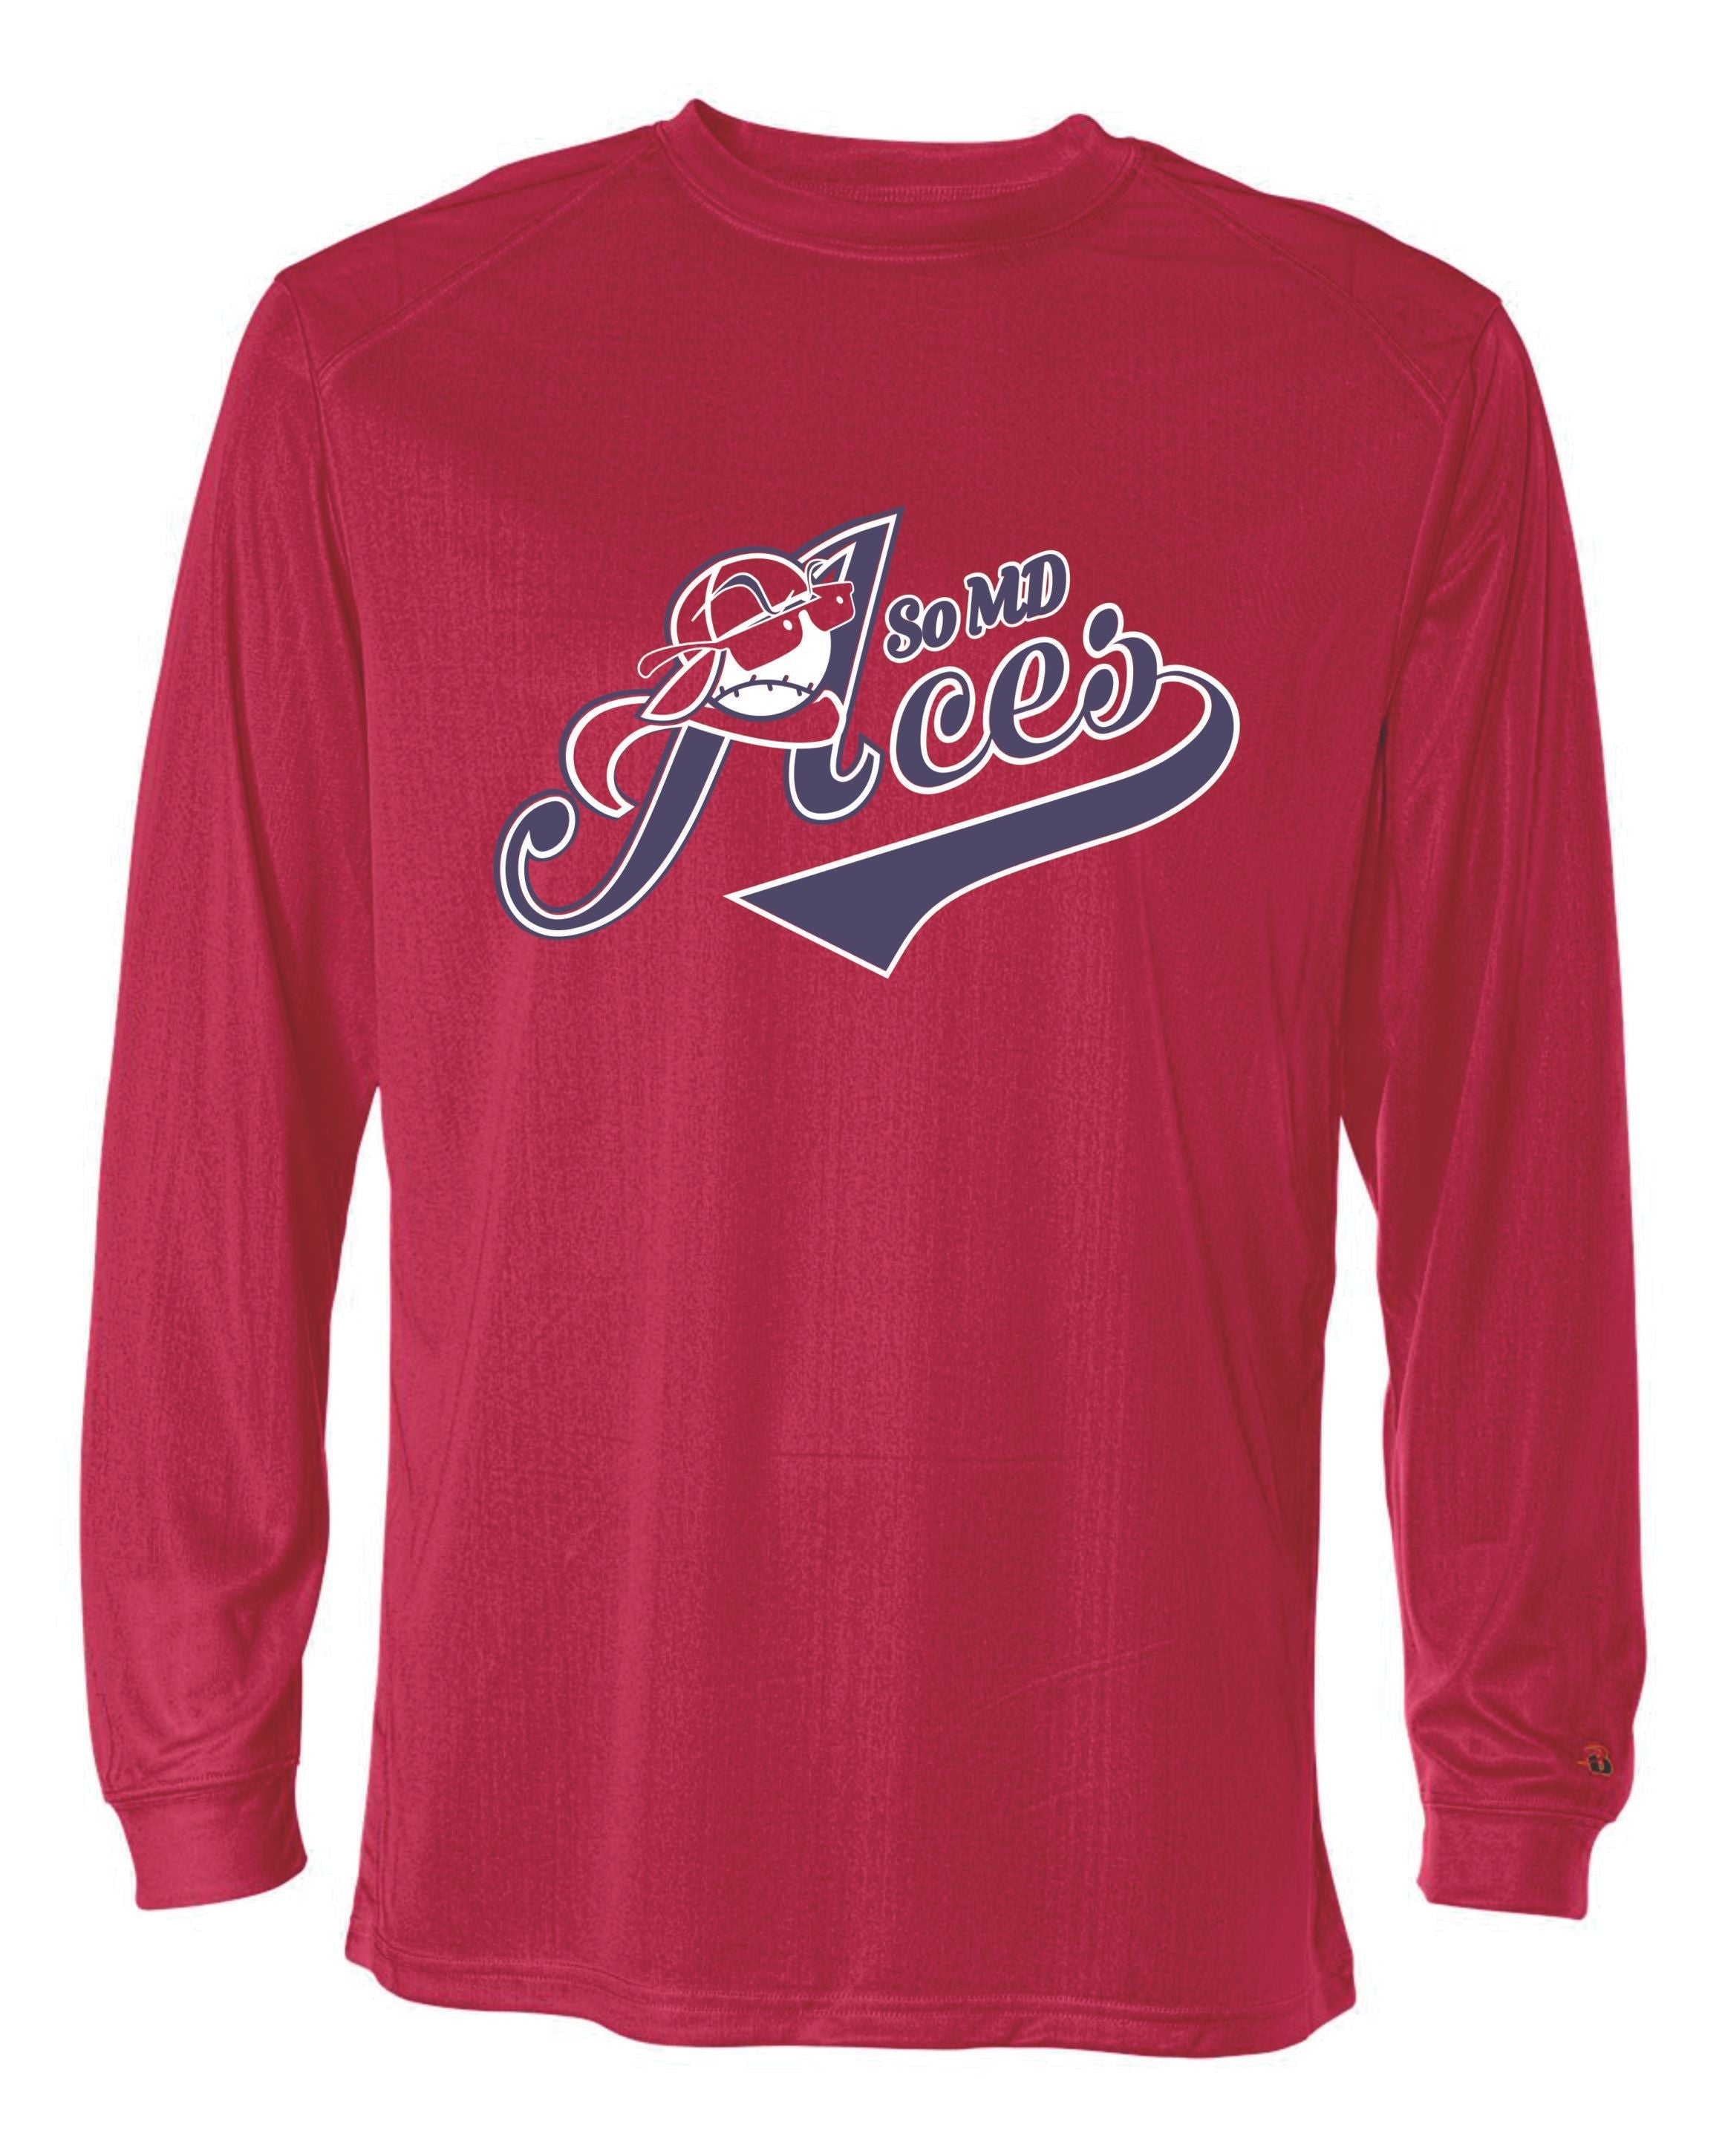 Aces Long Sleeve Badger Dri Fit Shirt YOUTH